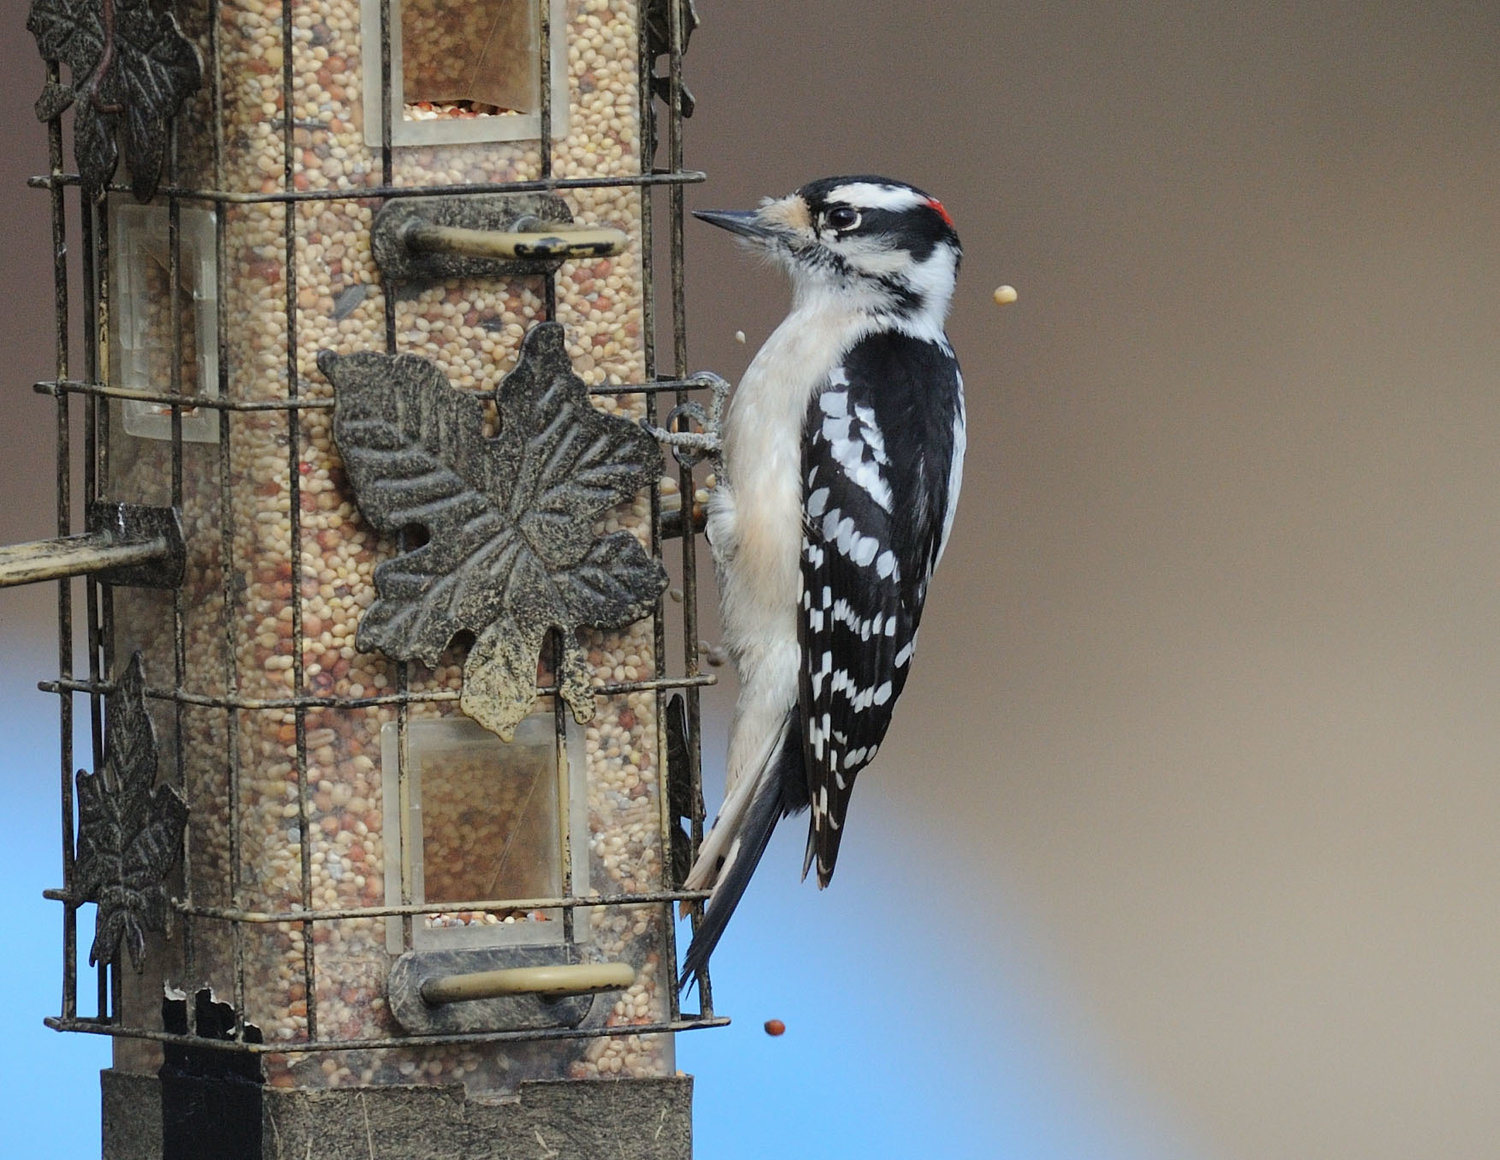 Downy woodpeckers will likely be the most seen woodpecker around feeders. They are the smallest species and closely resemble the hairy woodpecker, which is a little larger, has a longer bill and does not have spots on the outmost of its tail feathers as the downy has.